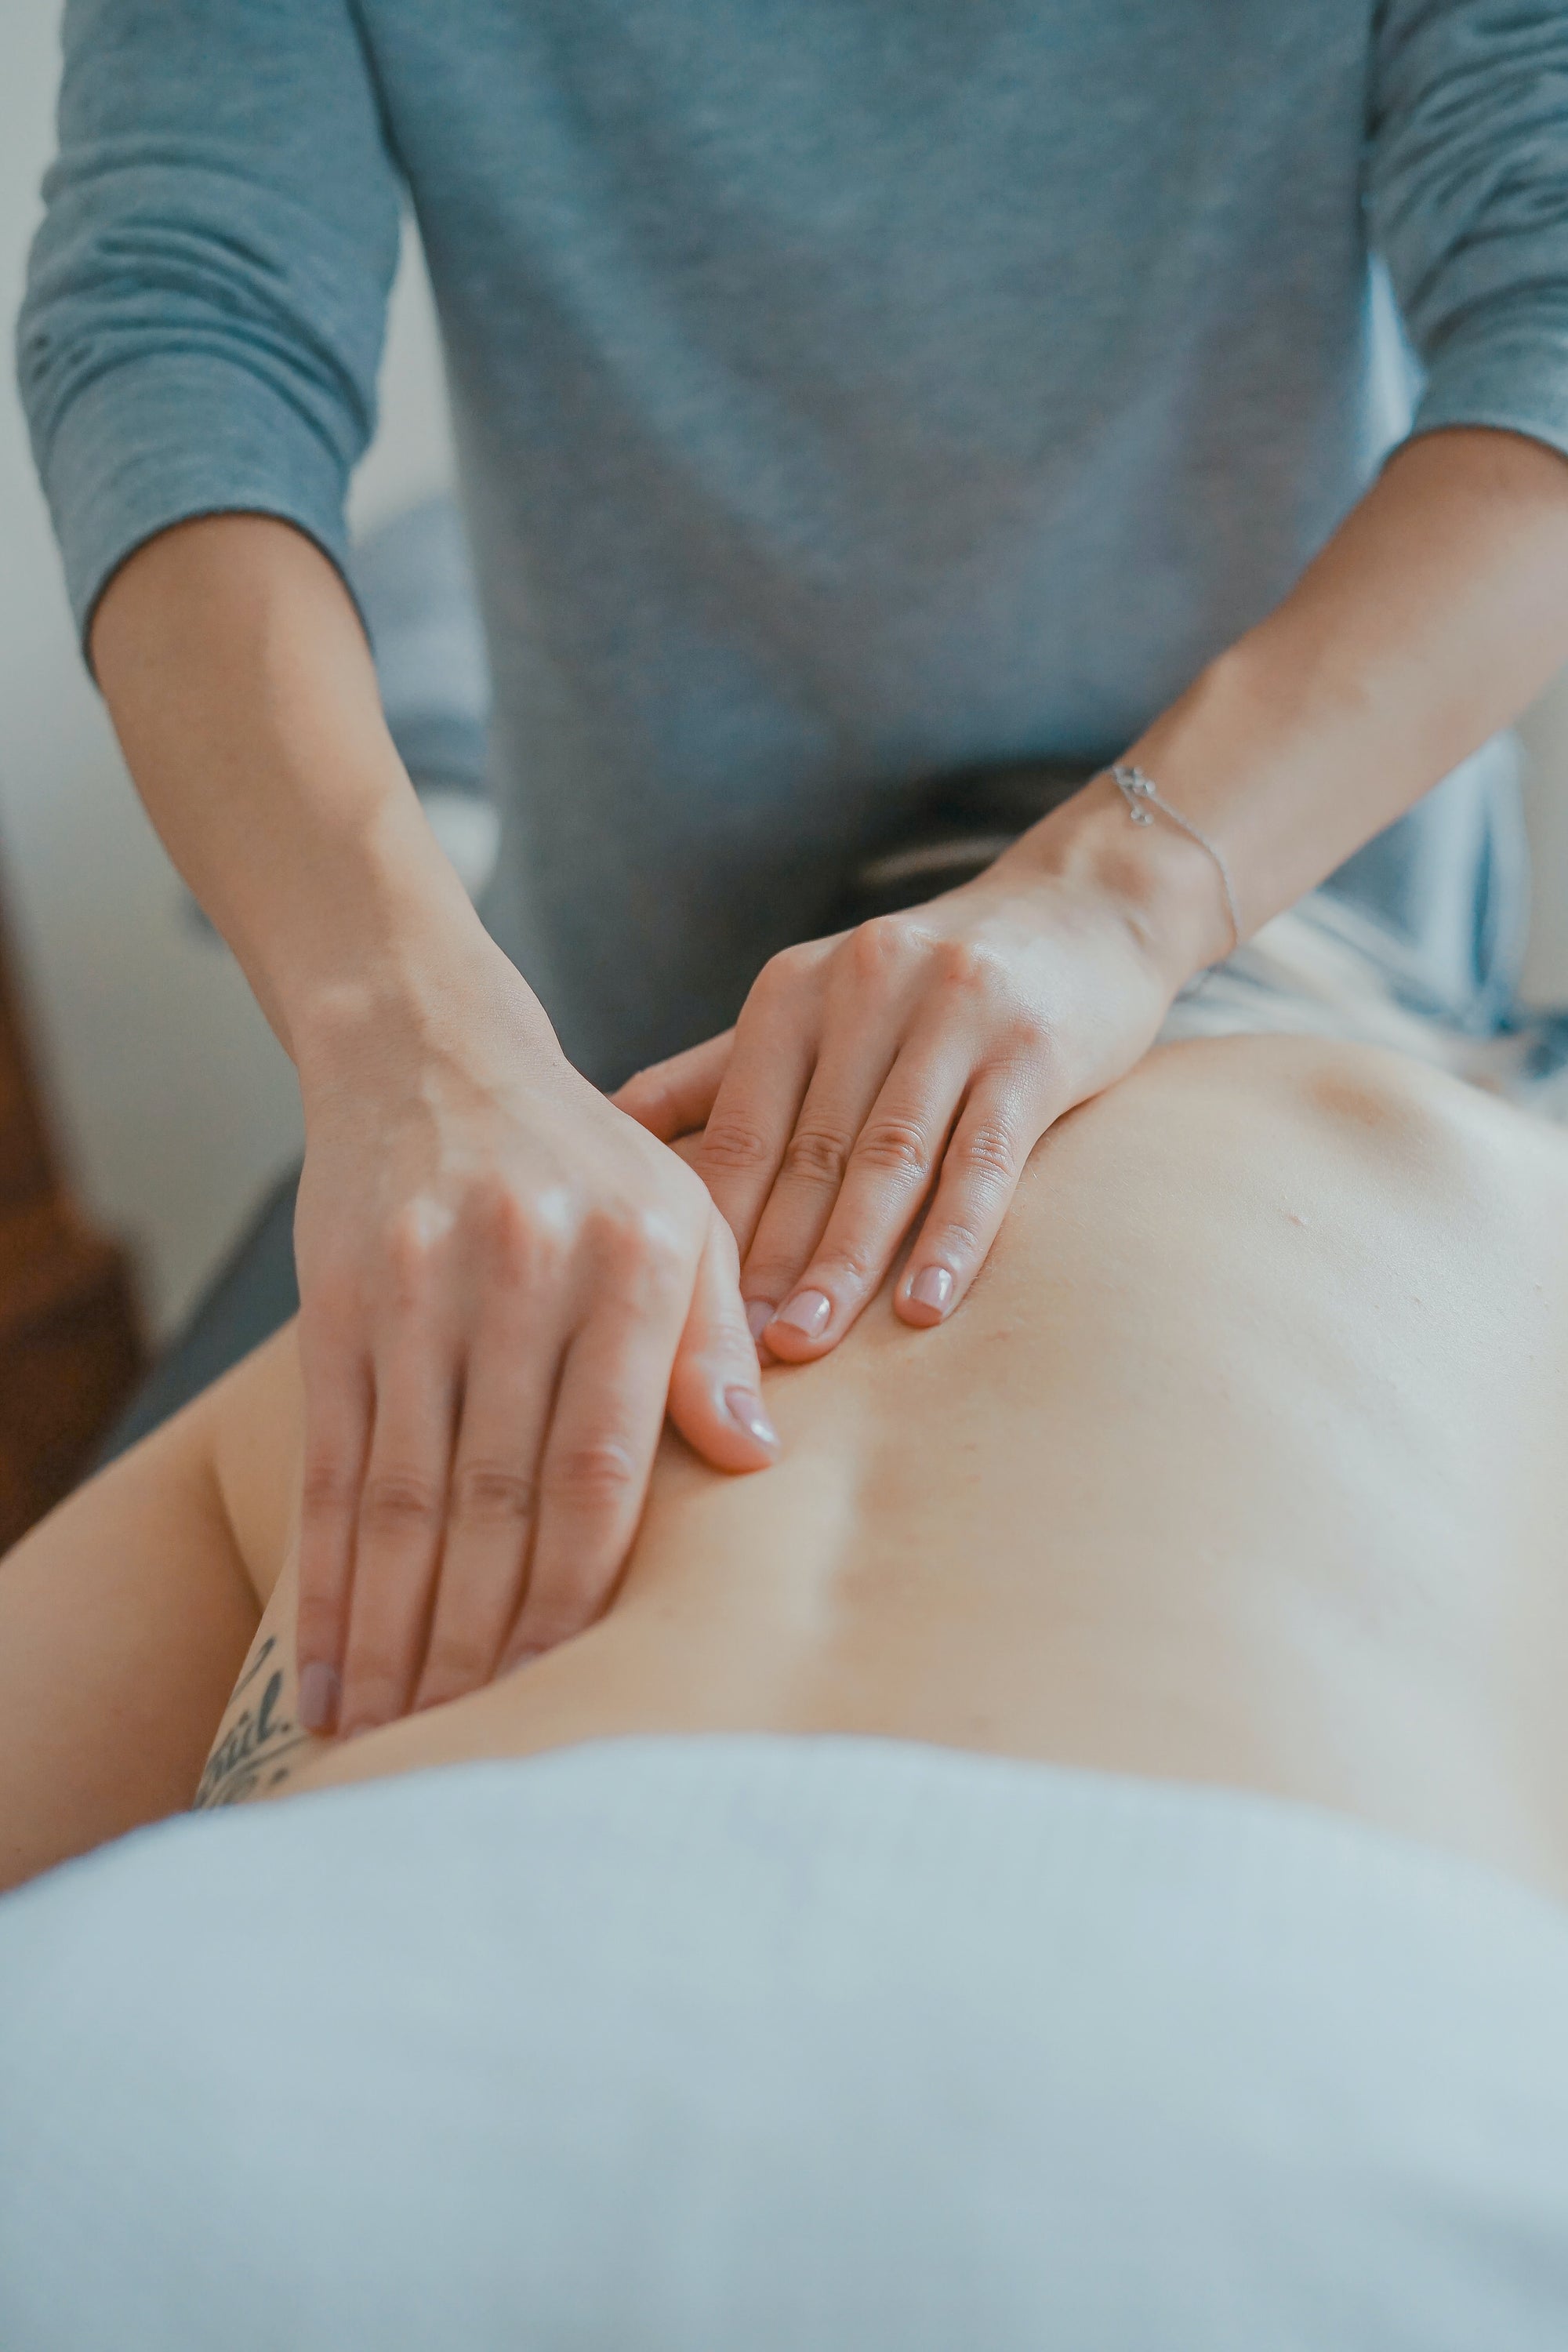 5 Benefits of Massage You Didn't Know About